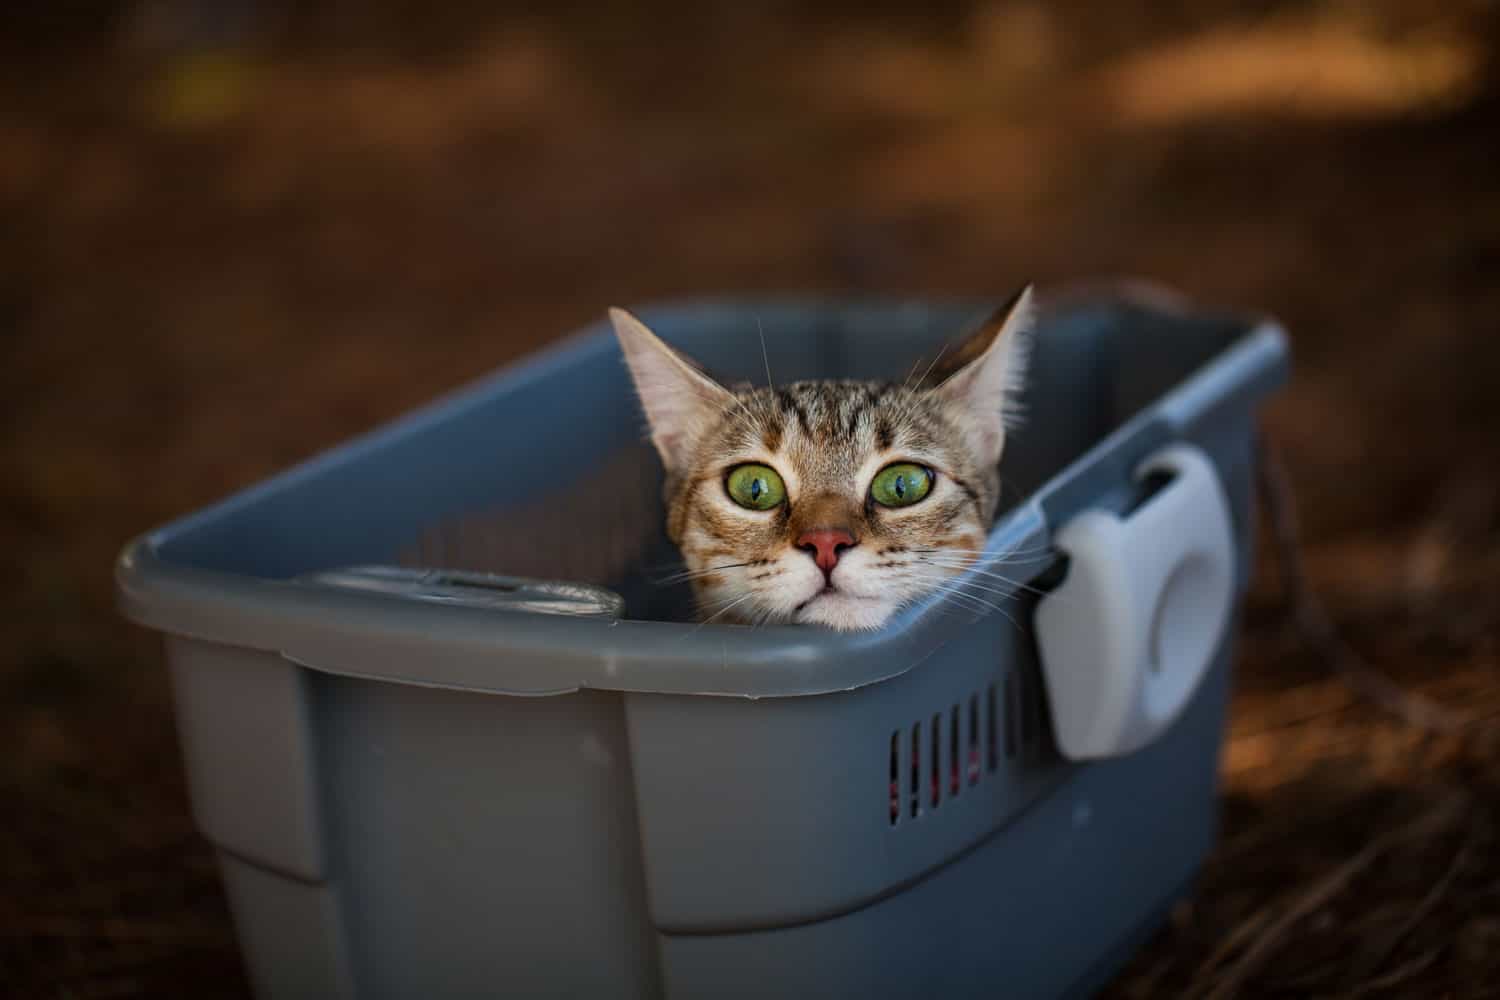 A cat inside the box appears to be fearful while using the litter box